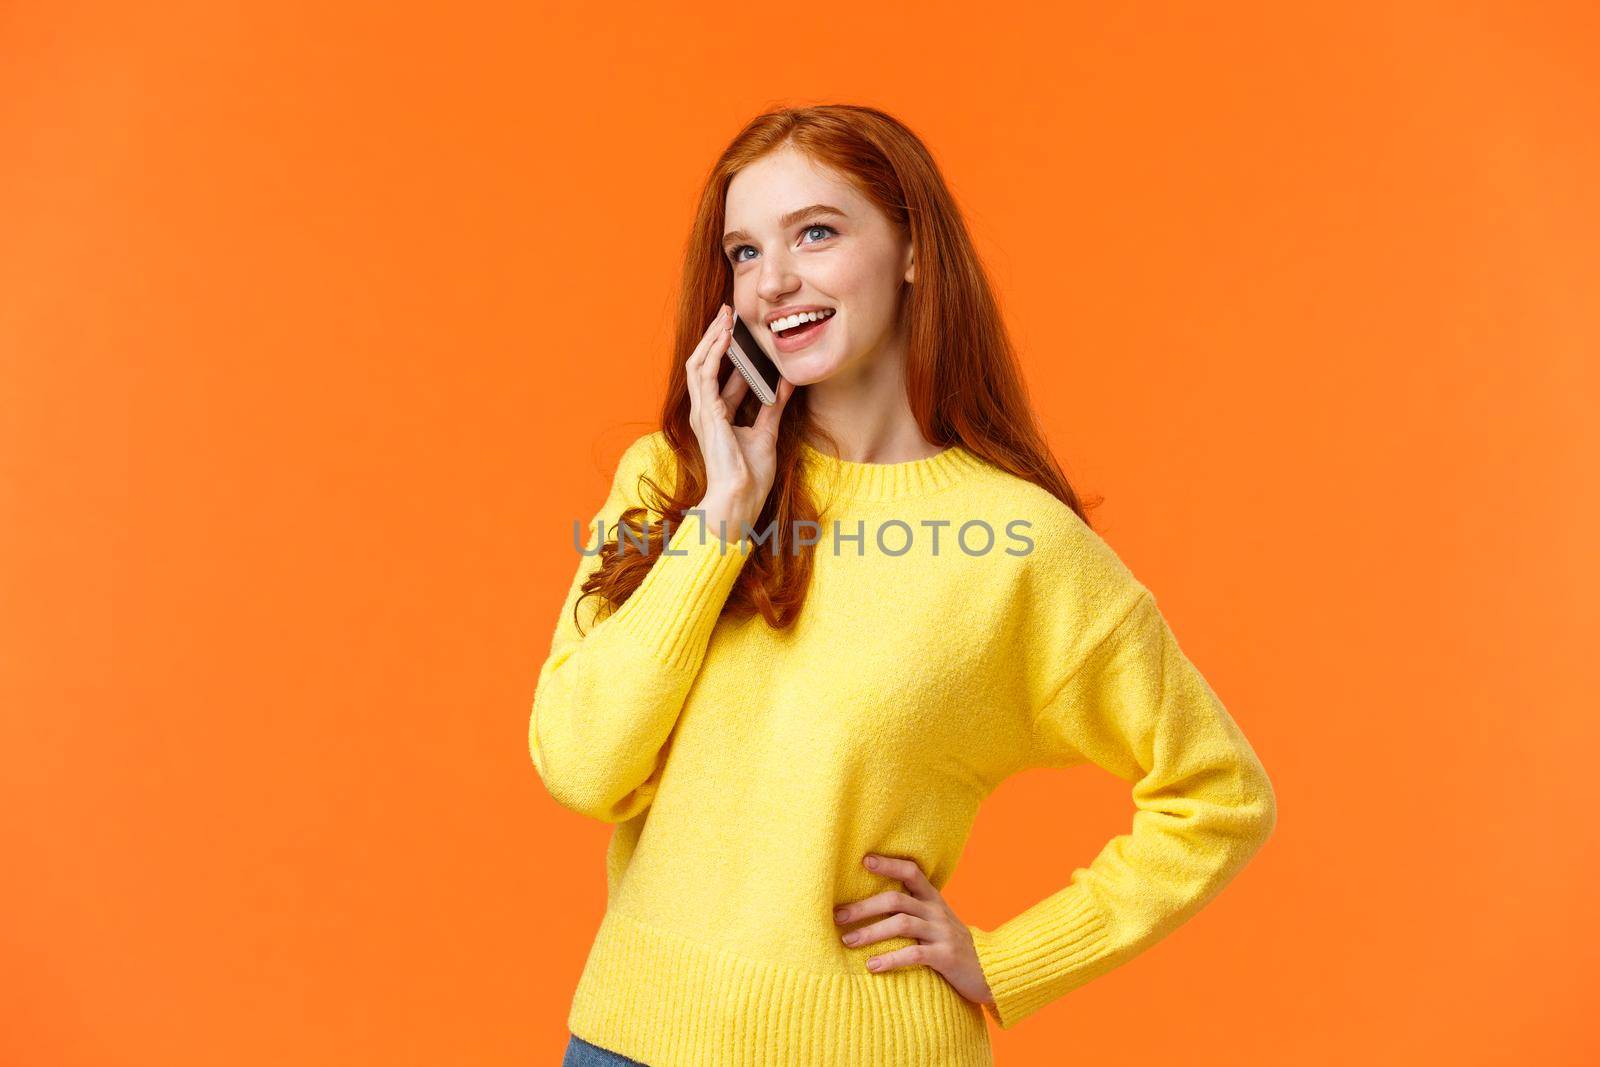 Outgoing pretty redhead girl having conversation on phone, calling friend, making arrangements, woman booking hotel or trip using mobile, speaking via smartphone, standing orange background.